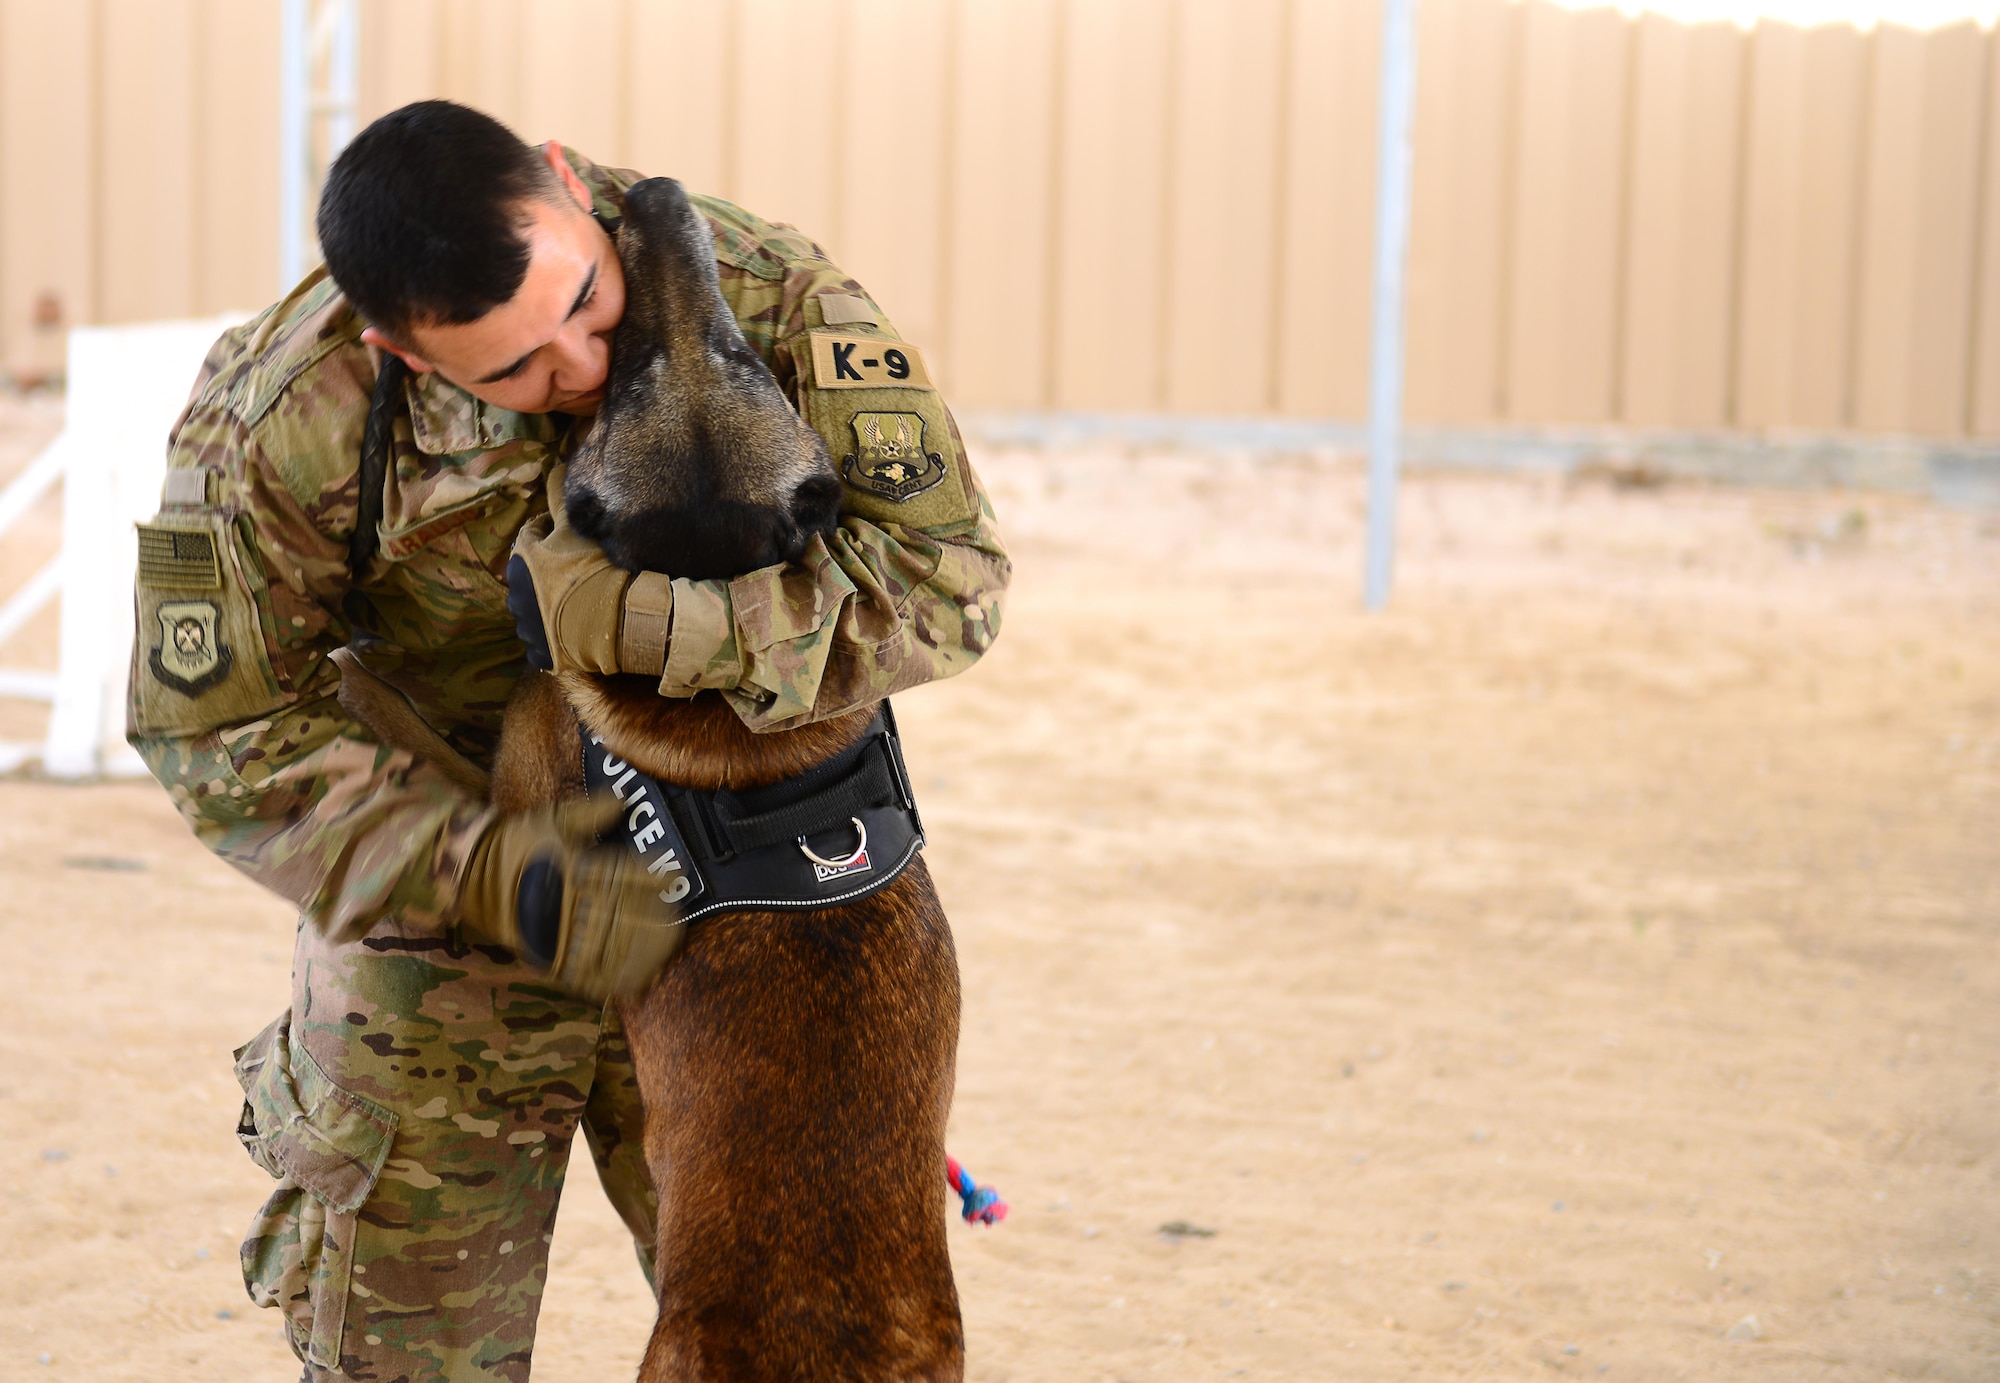 Syrius, a military working dog assigned to the 407th Expeditionary Security Forces Squadron, jumps up and hugs his handler U.S. Air Force Senior Airman Omar Araujo in Southwest Asia on May 23, 2017. Araujo and Syrius have been working together for a close to a year and are deployed in support of Operation Inherent Resolve. (U.S. Air Force photo by Tech Sgt. Andy M. Kin)